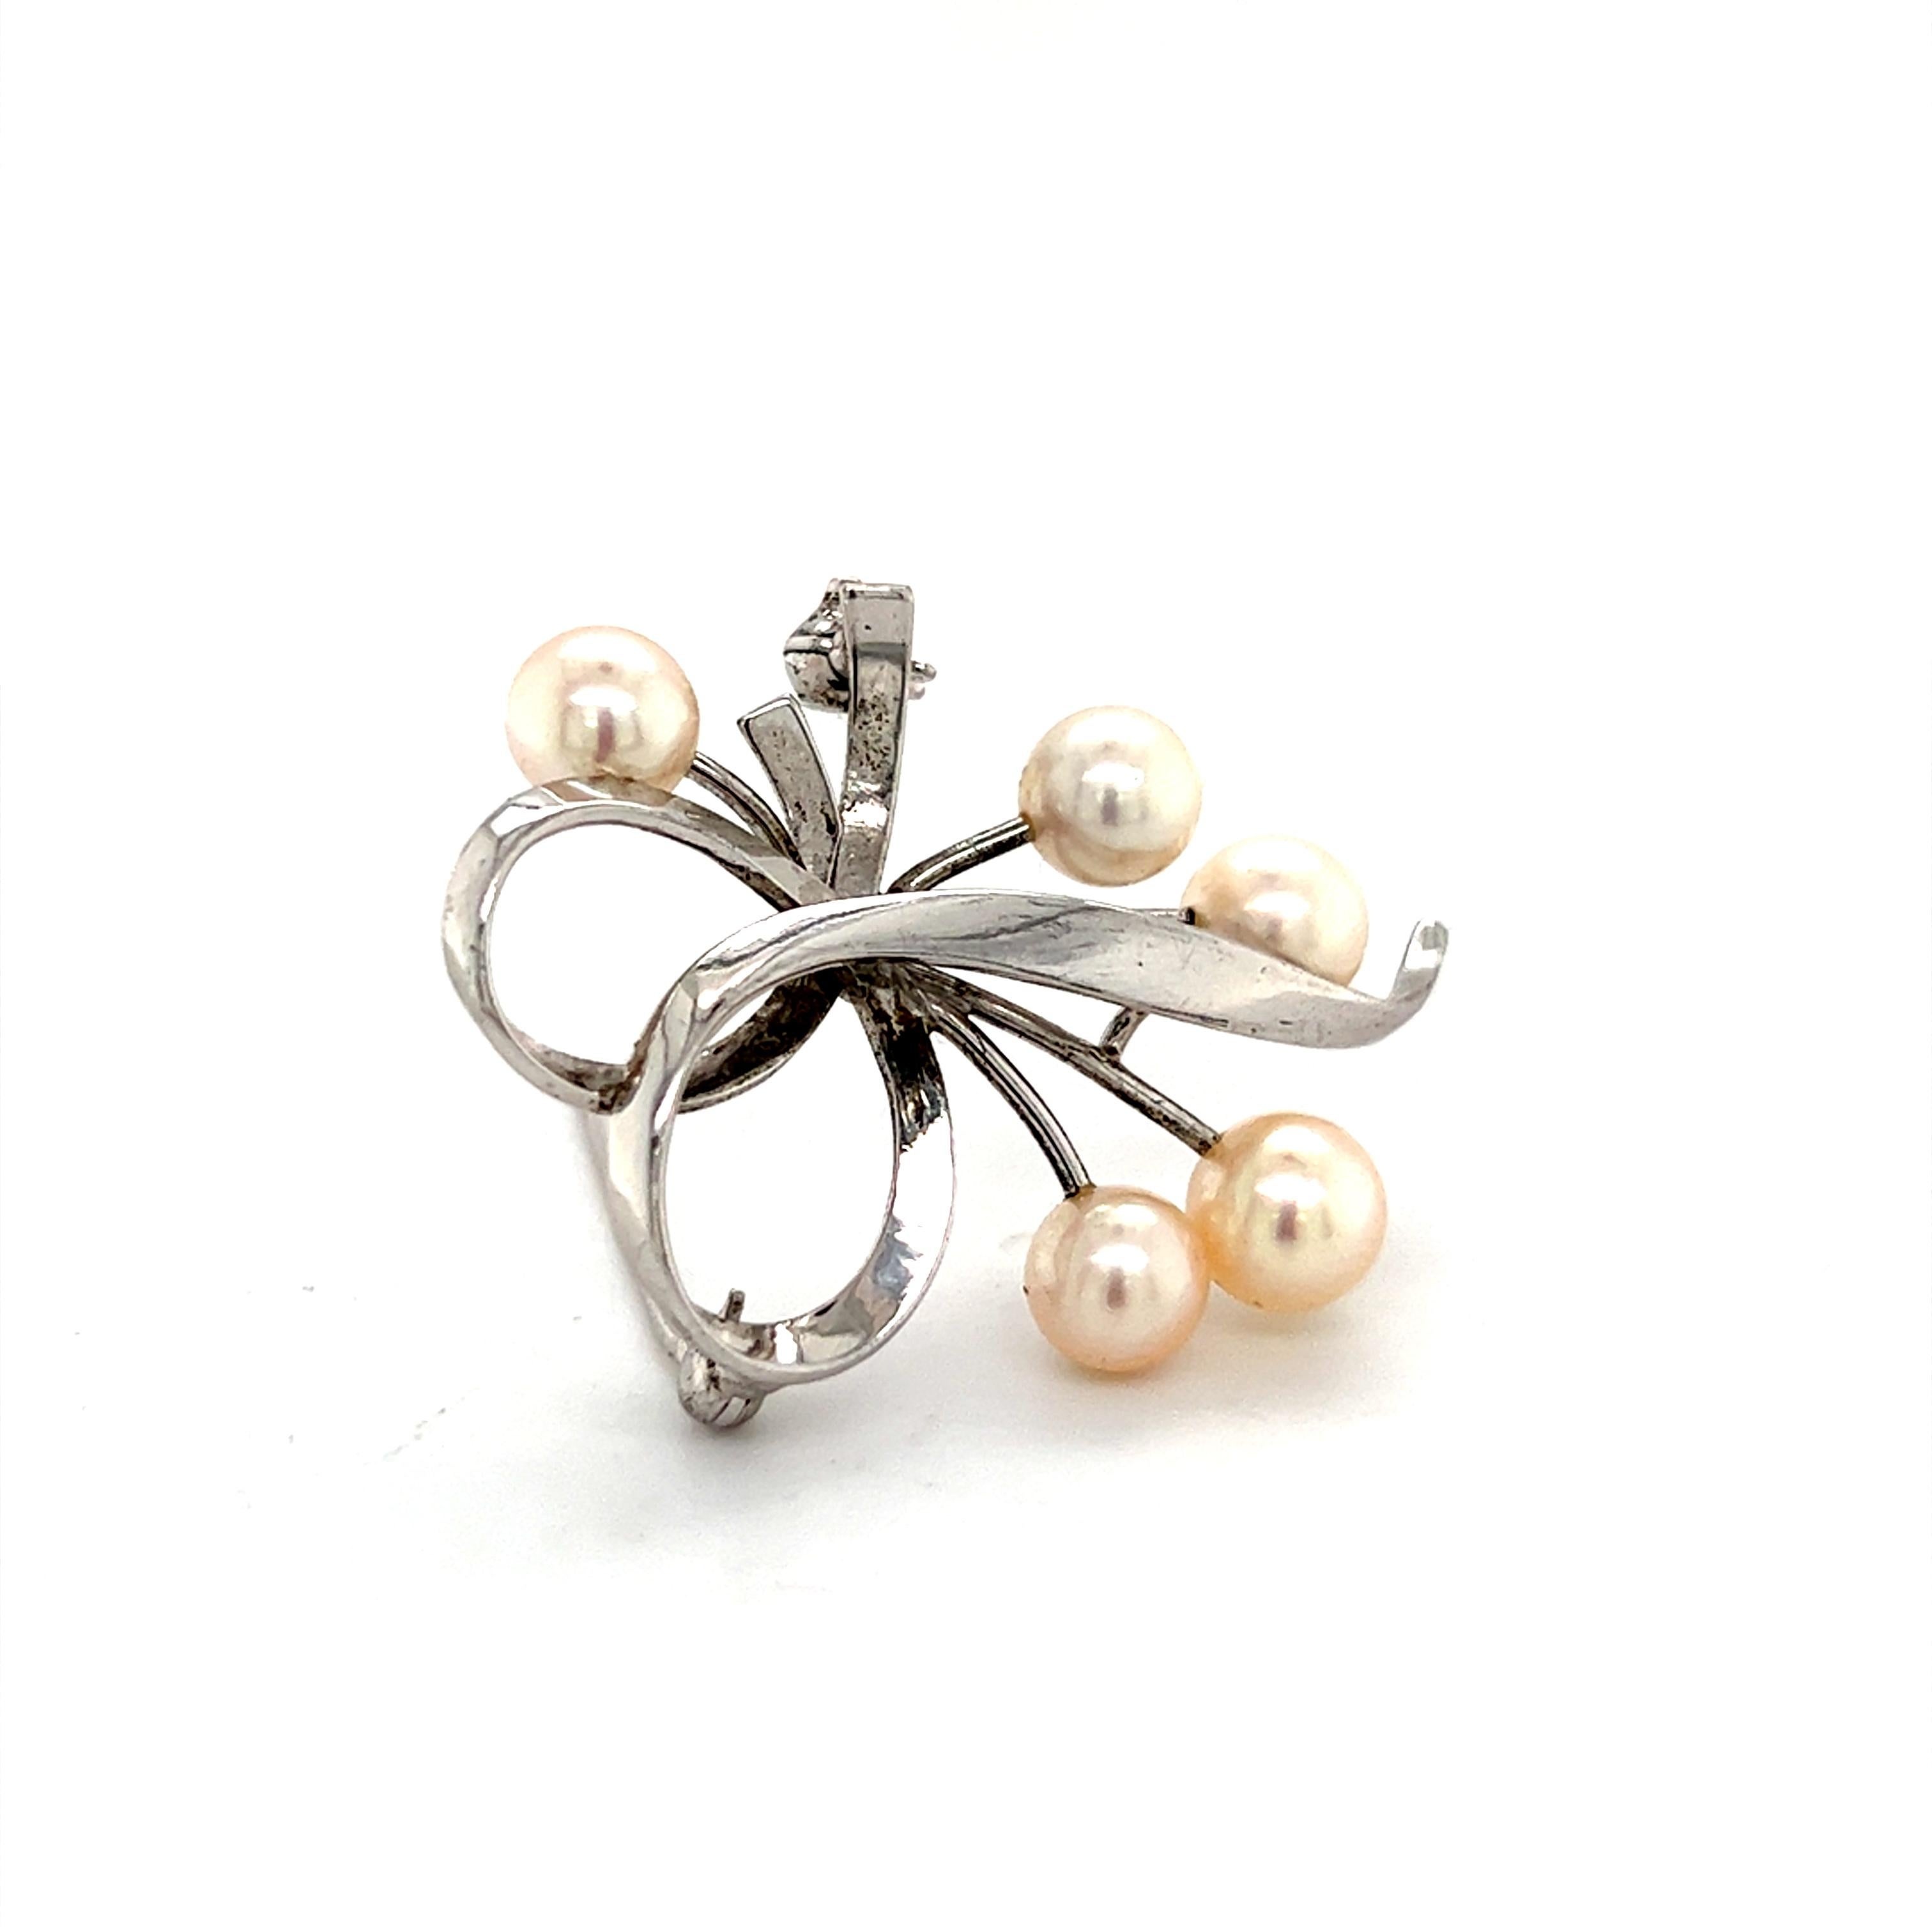 Mikimoto Estate Akoya Pearl Brooch Sterling Silver 6.6 mm 5.2 Grams For Sale 4